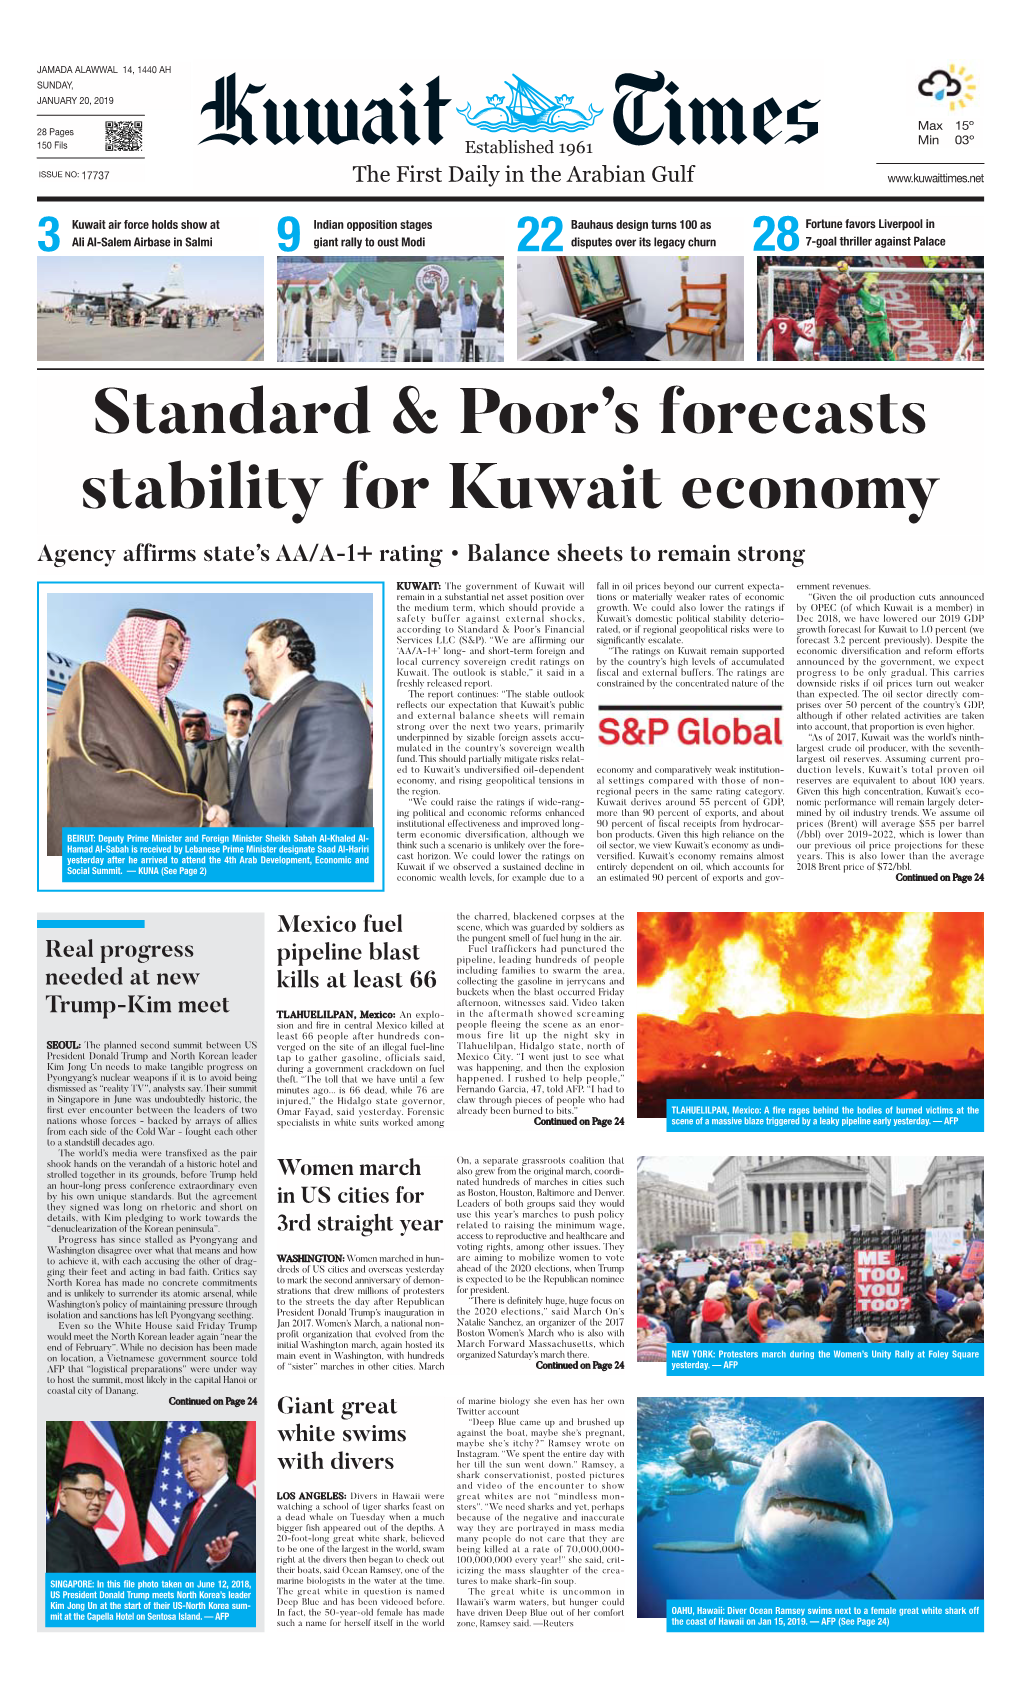 Standard & Poor's Forecasts Stability for Kuwait Economy